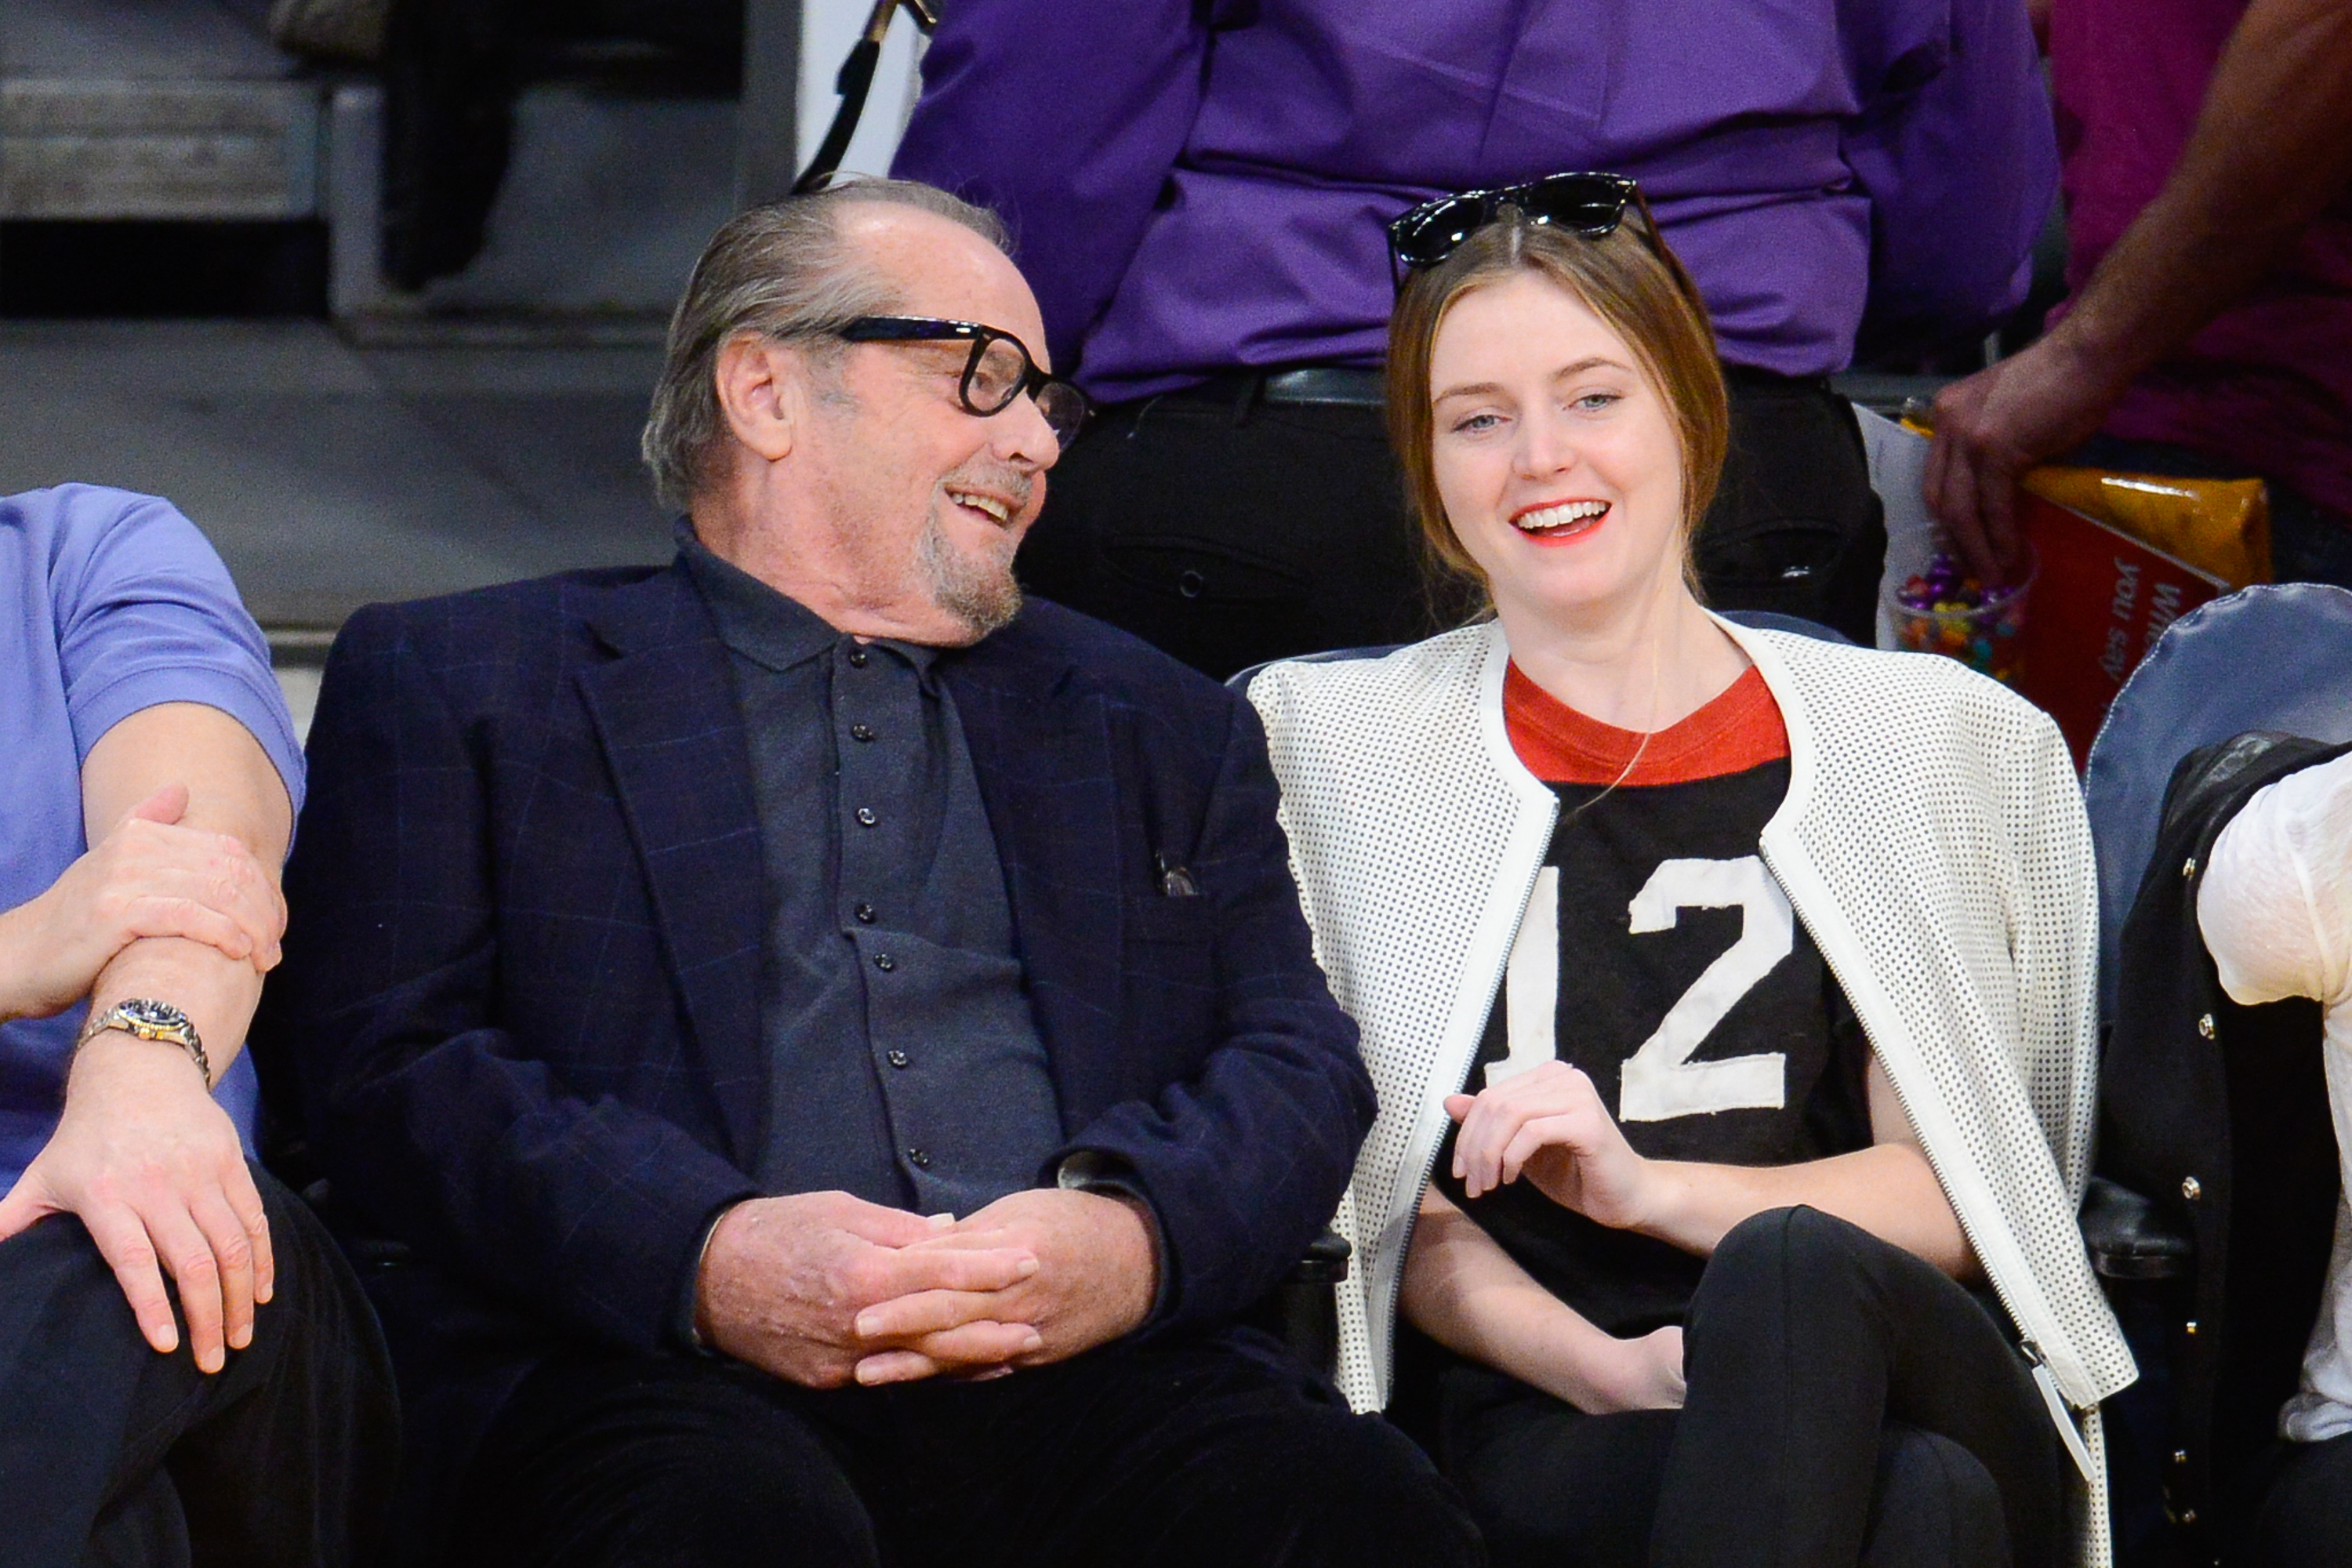 Jack Nicholson and Lorraine Nicholson at a basketball game between the Golden State Warriors and the Los Angeles Lakers in Los Angeles, California on November 16, 2014 | Source: Getty Images